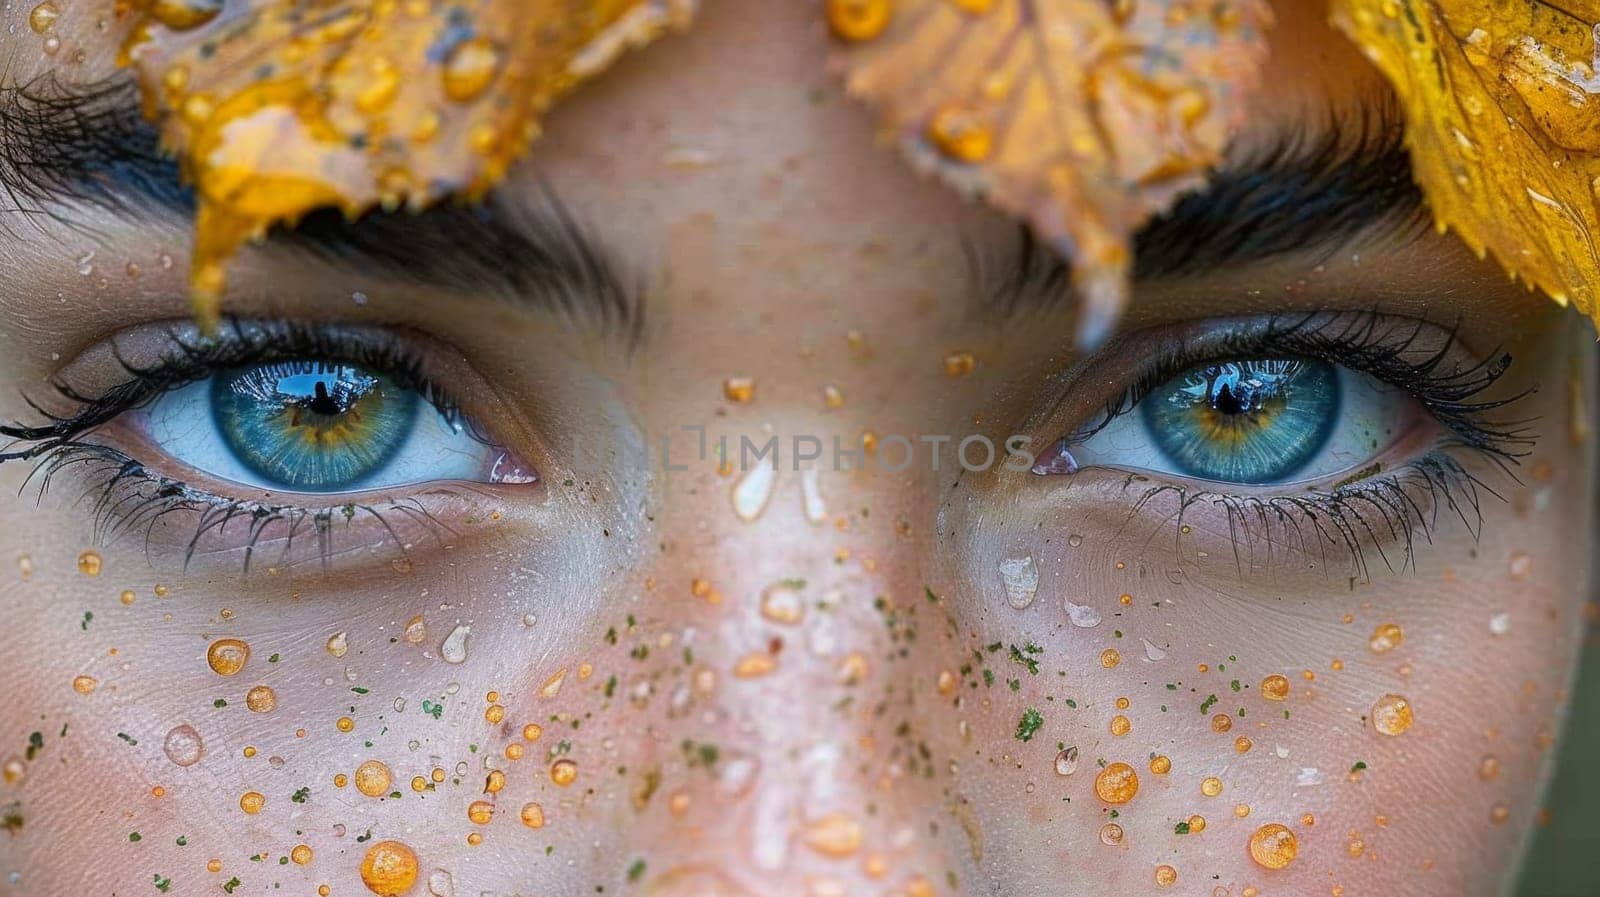 A close up of a woman with blue eyes and leaves on her face